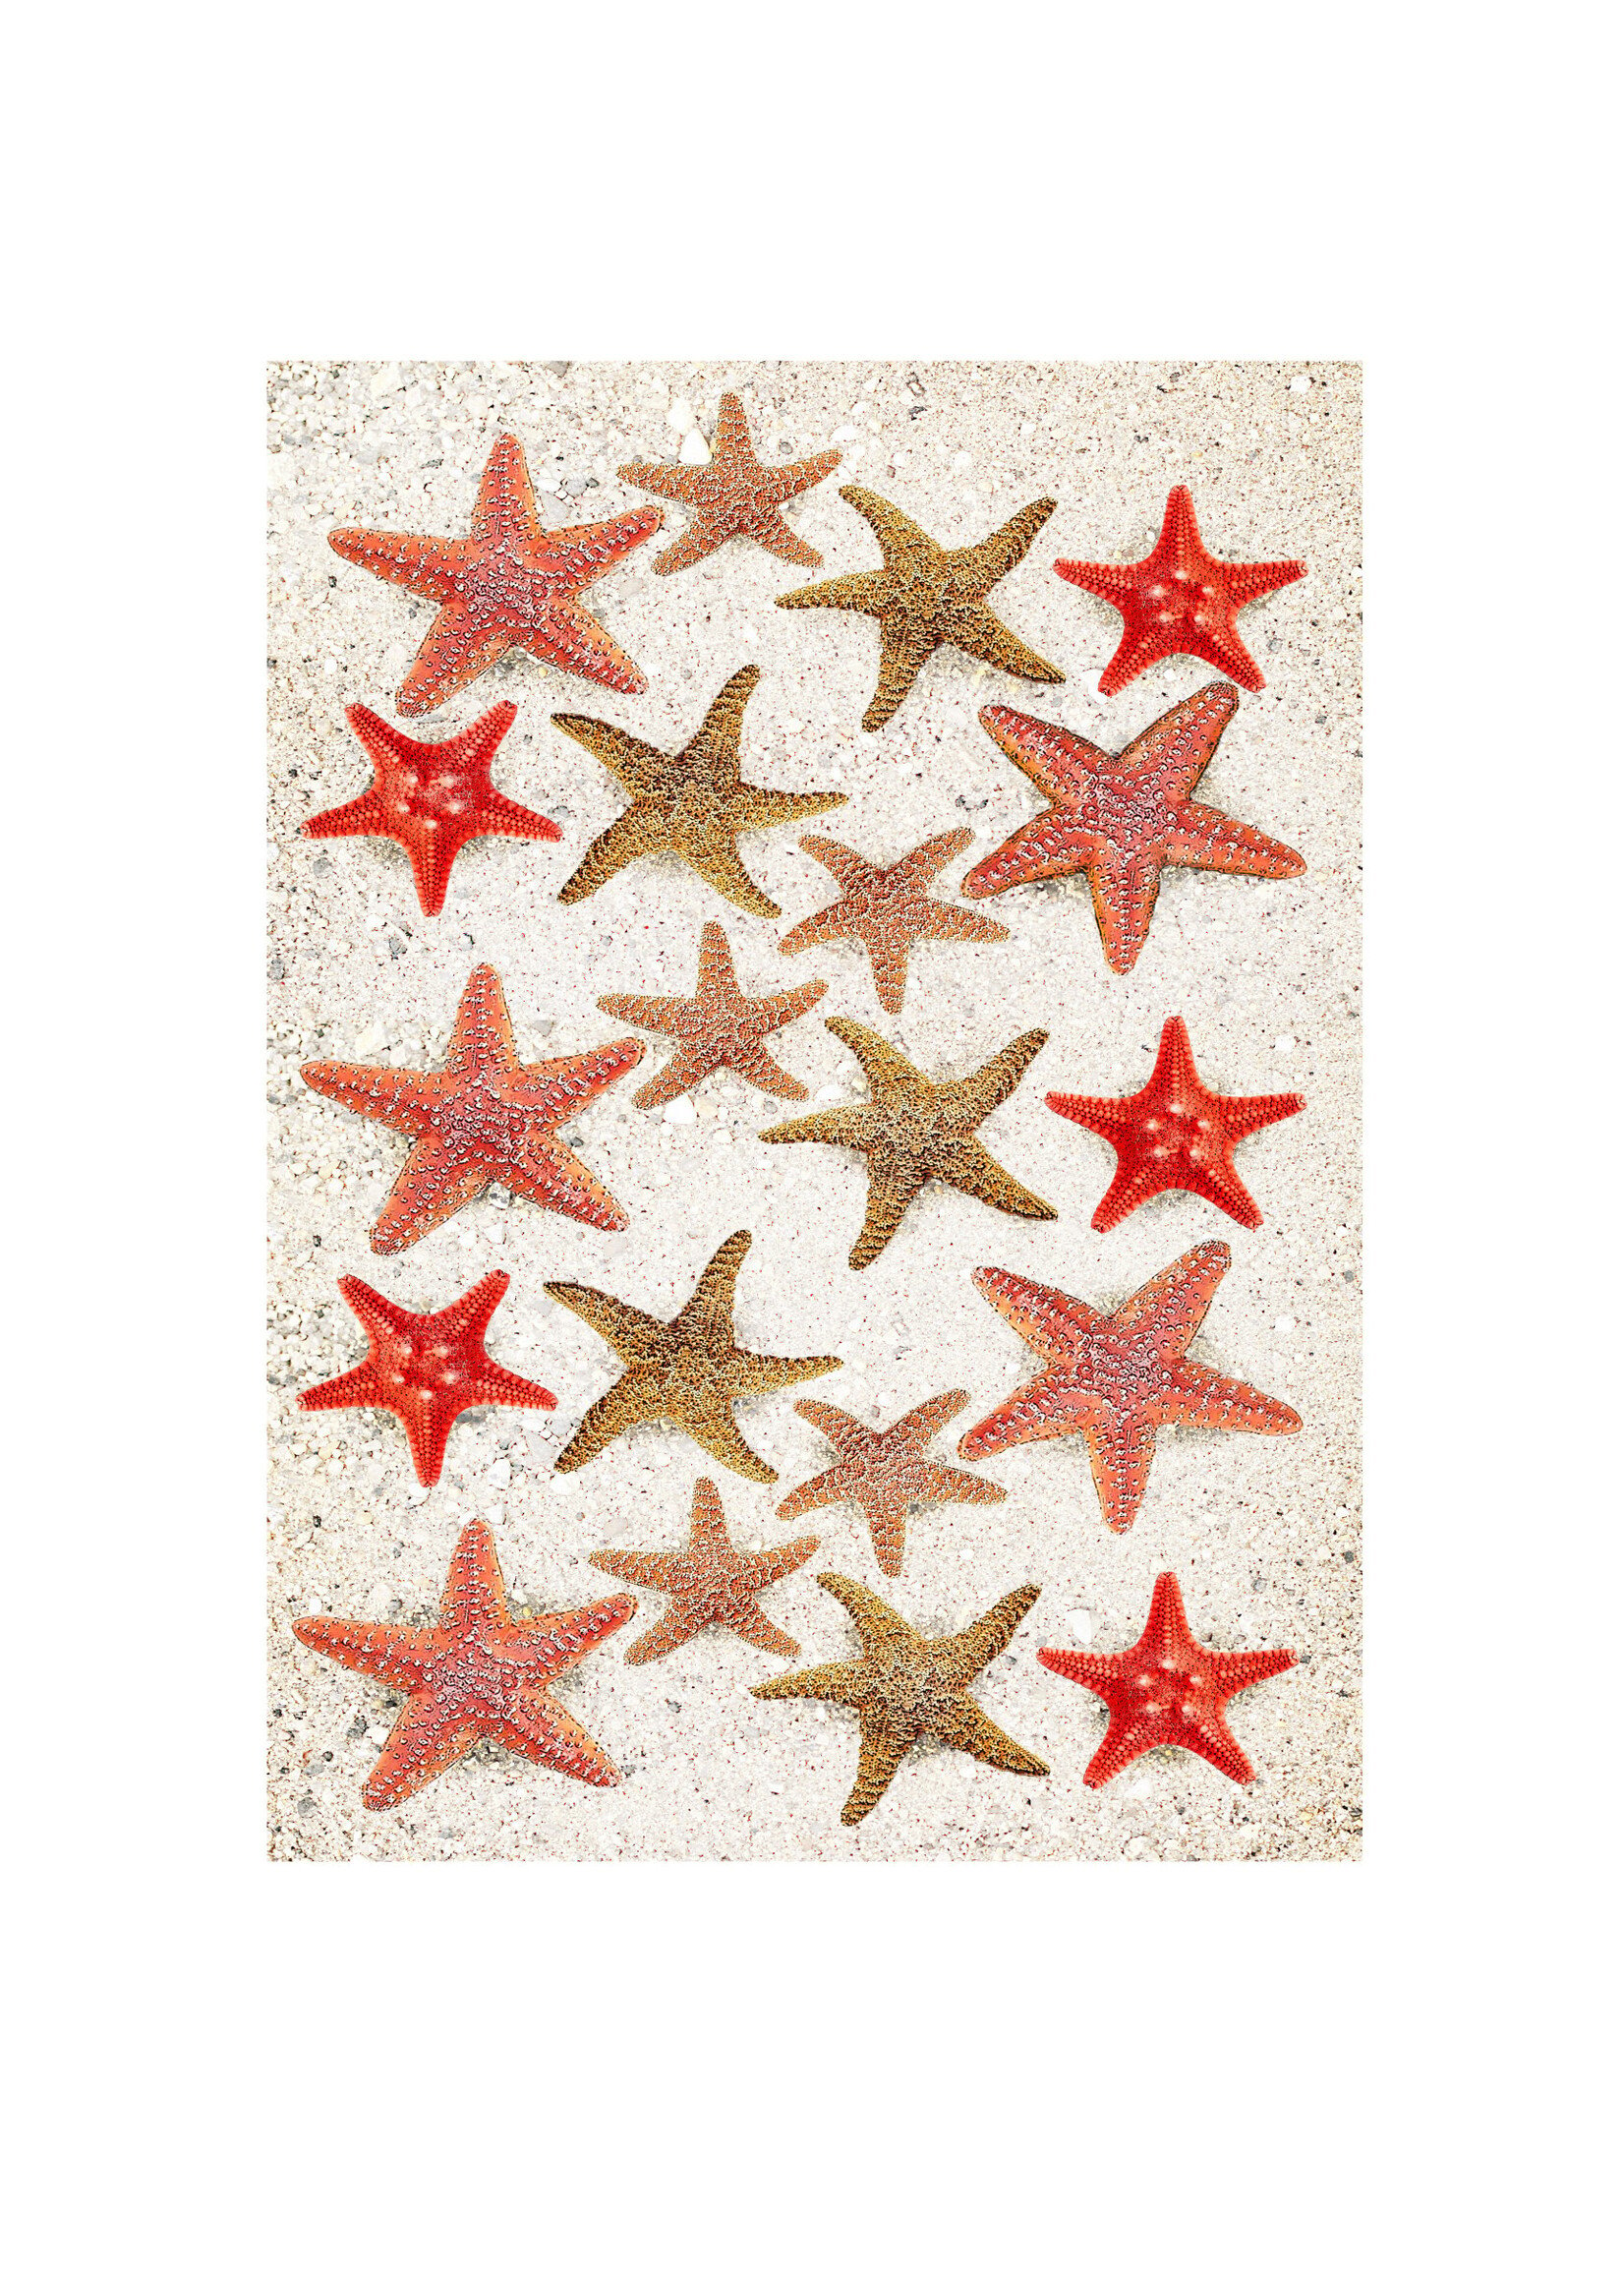 Alphie and Ollie starfish kitchen towel 18 x 24 inches flour sack material